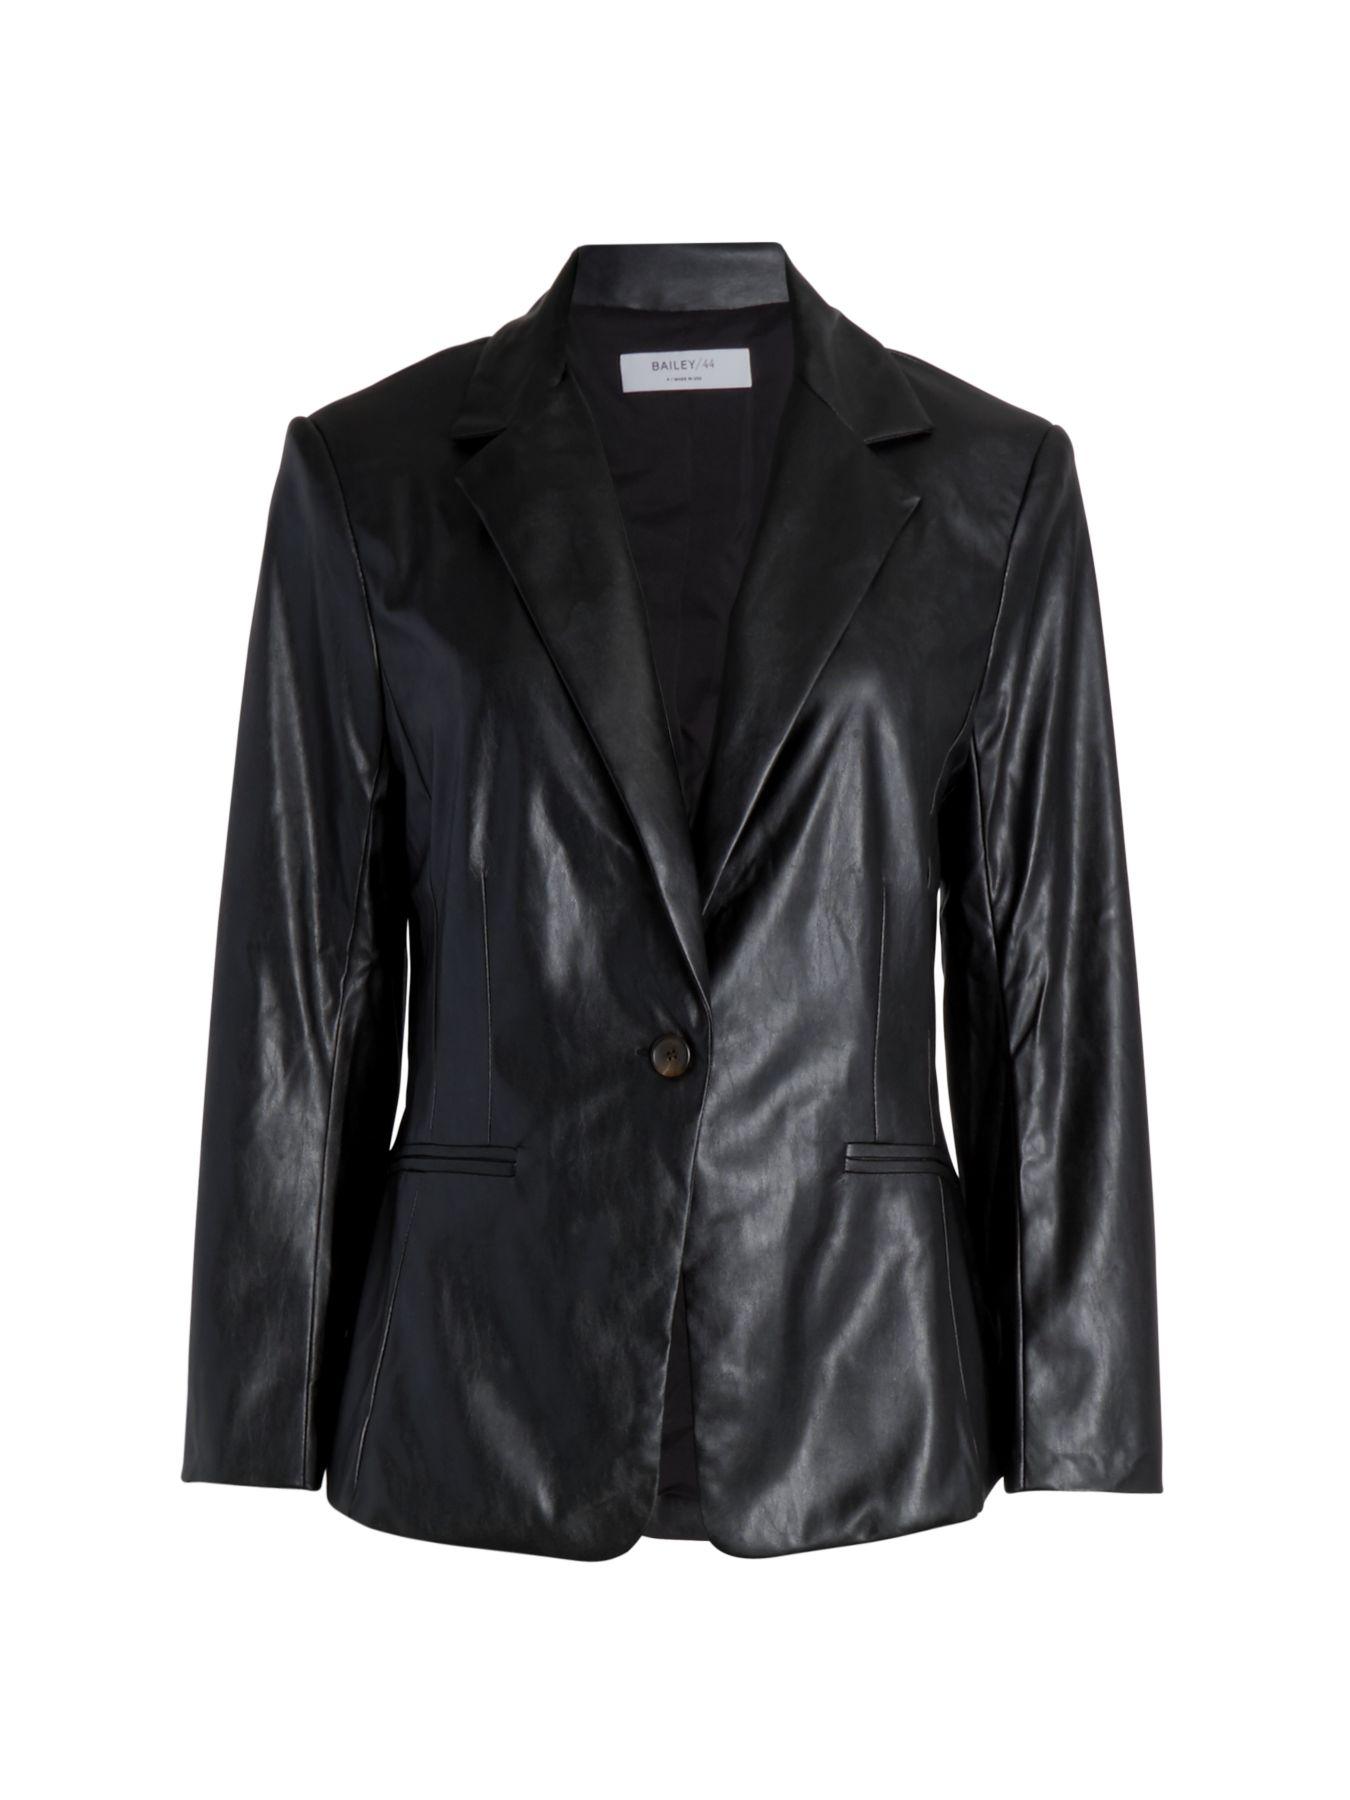 Bailey 44 Adelaide Leather Blazer in Black - Lyst